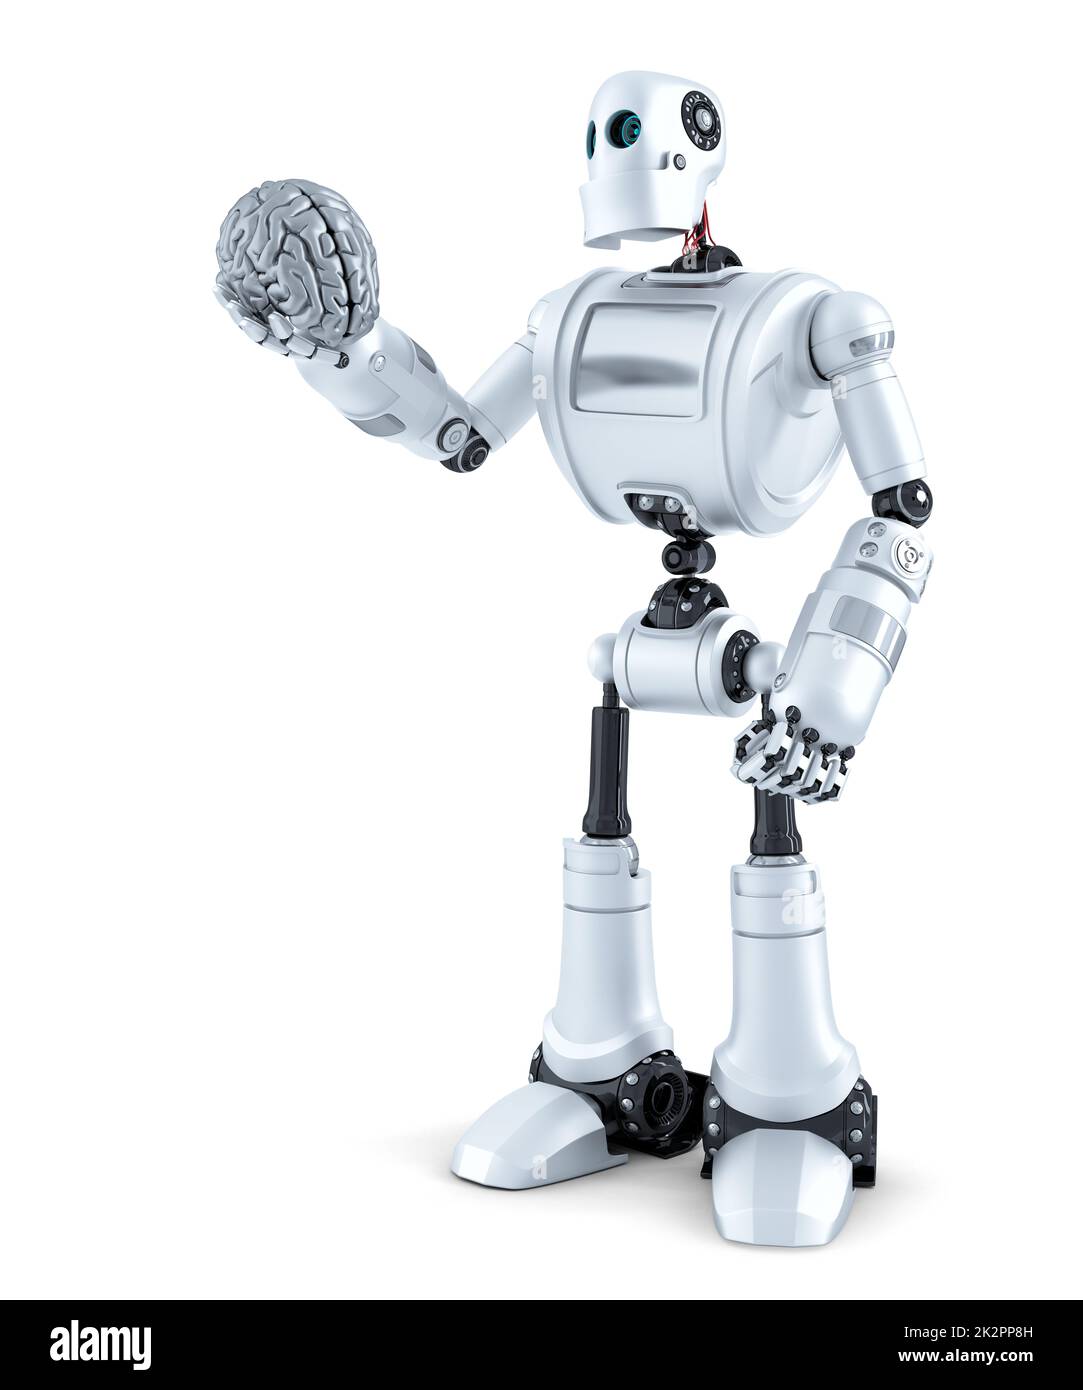 Robot holds a human brain in his hand. Isolated. Contains clipping path Stock Photo